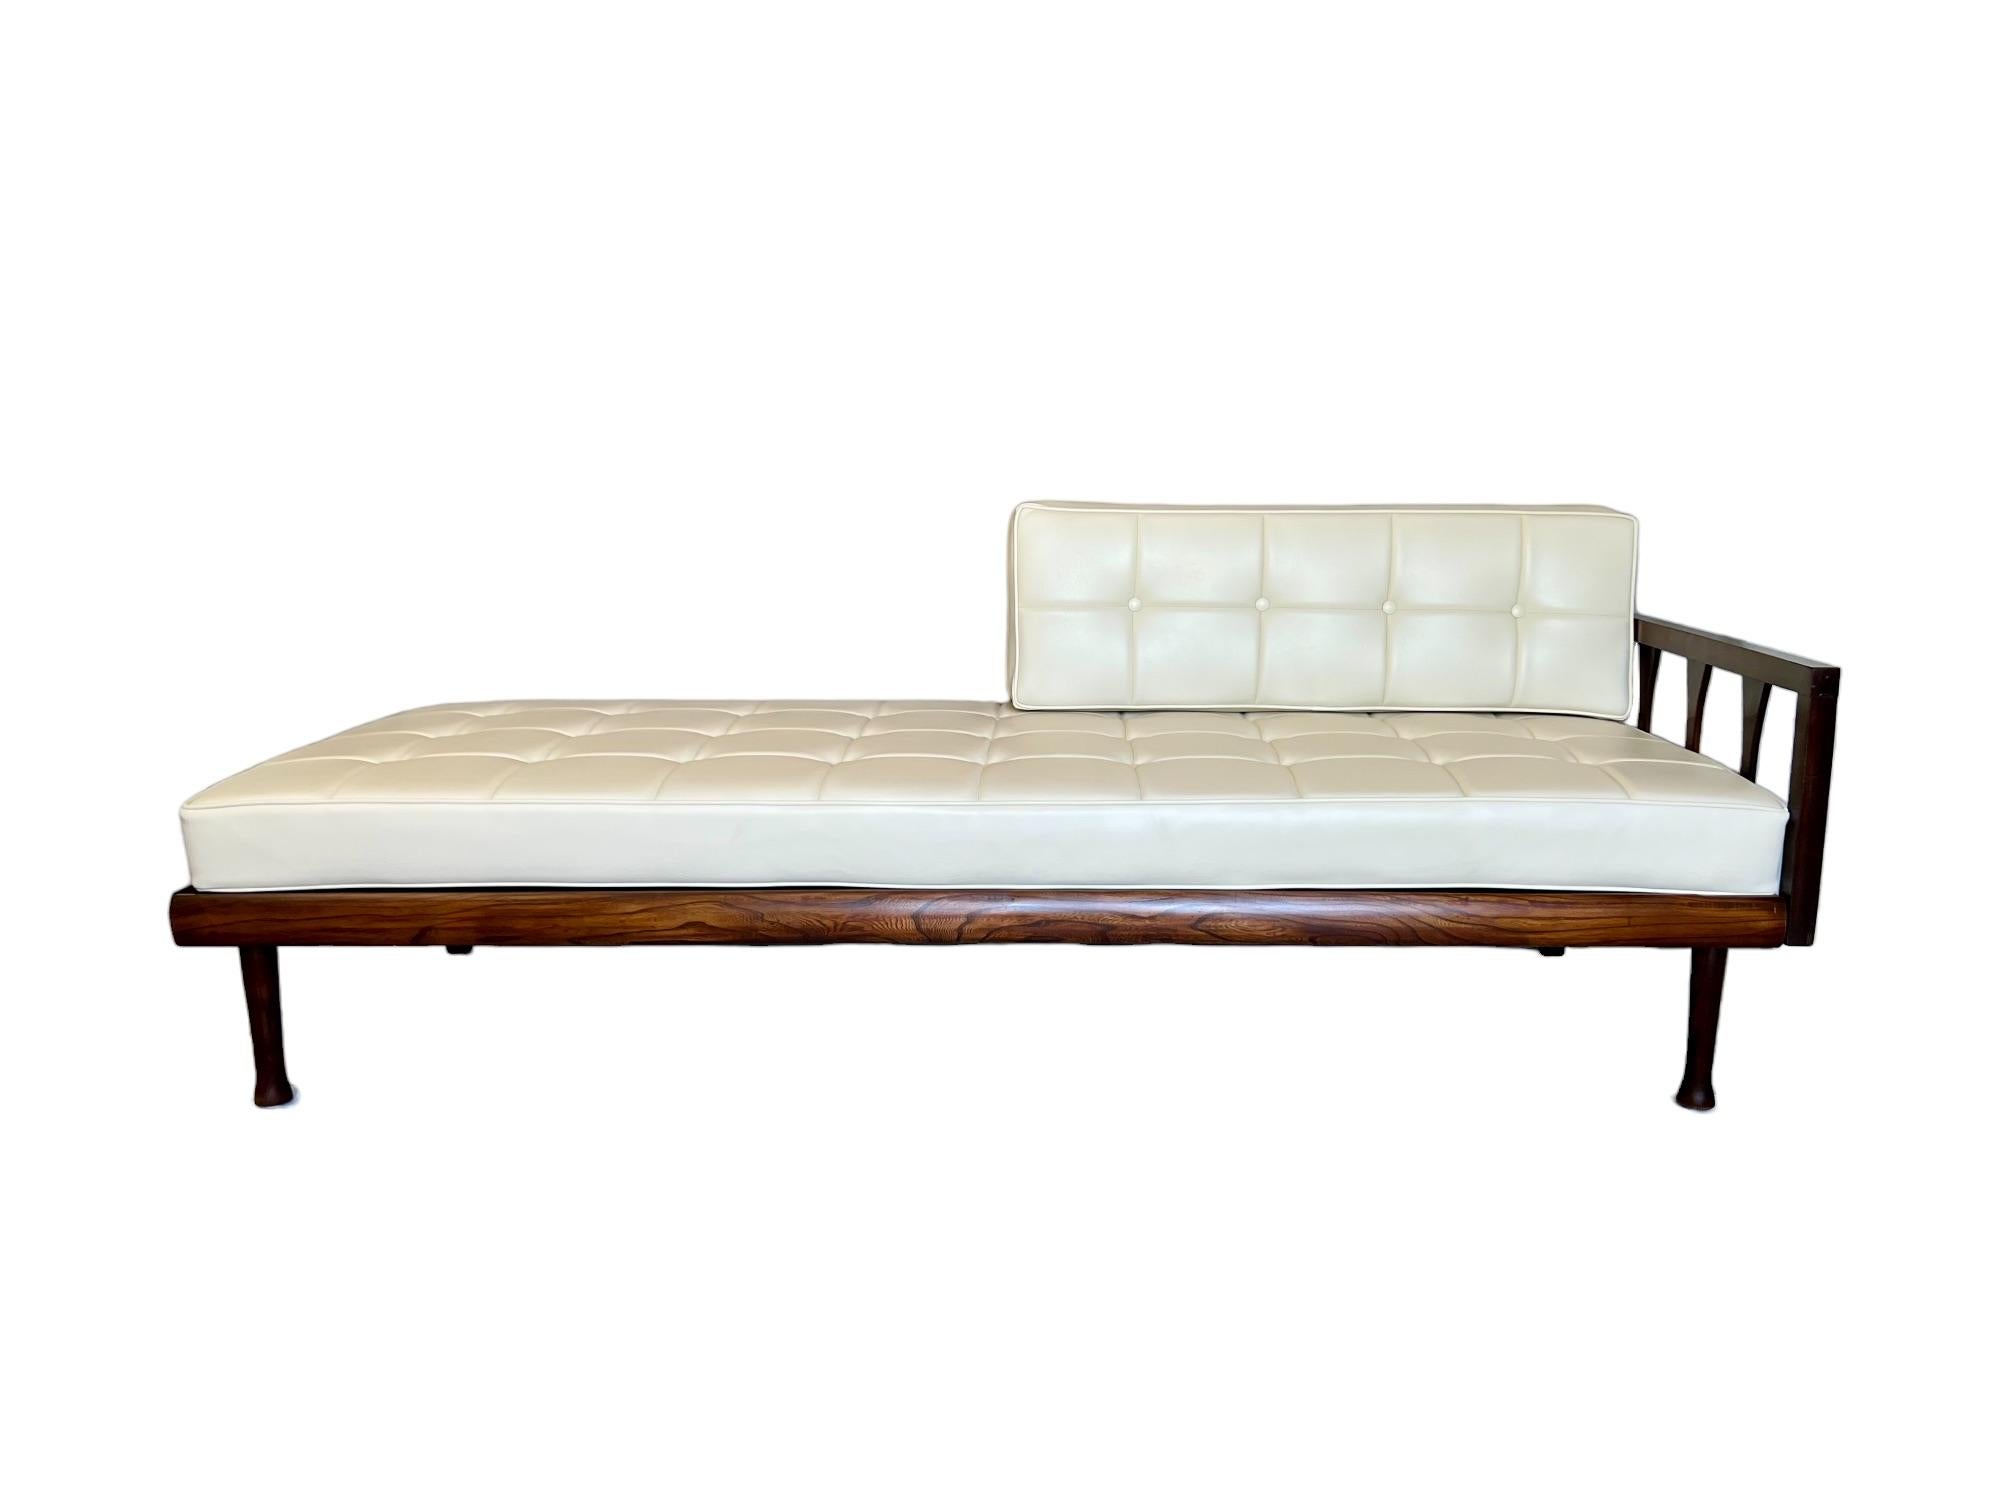 Carved Mid-Century Modern Walnut & Tufted Vinyl Daybed Sofa, 1950s